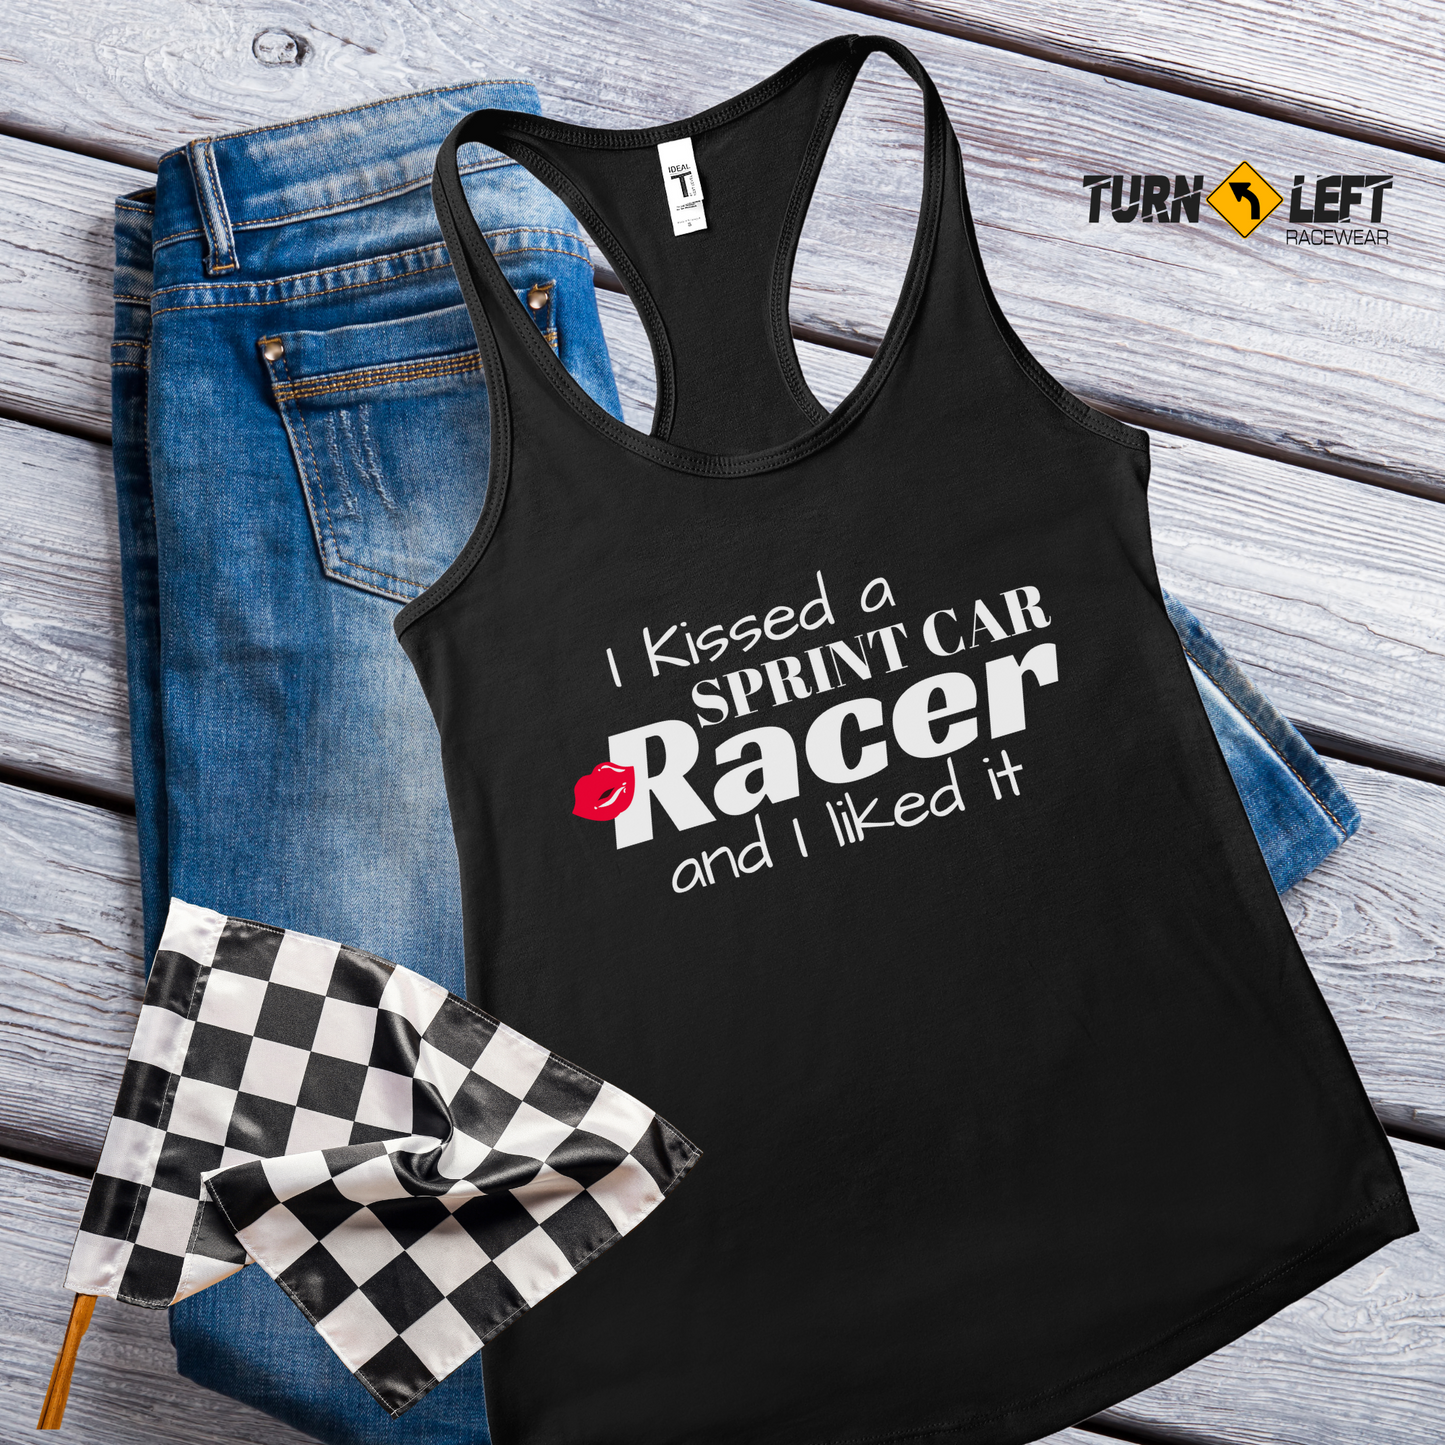 I KISSED A SPRINT CAR RACER AND I LIKED IT WOMEN TANK TOP